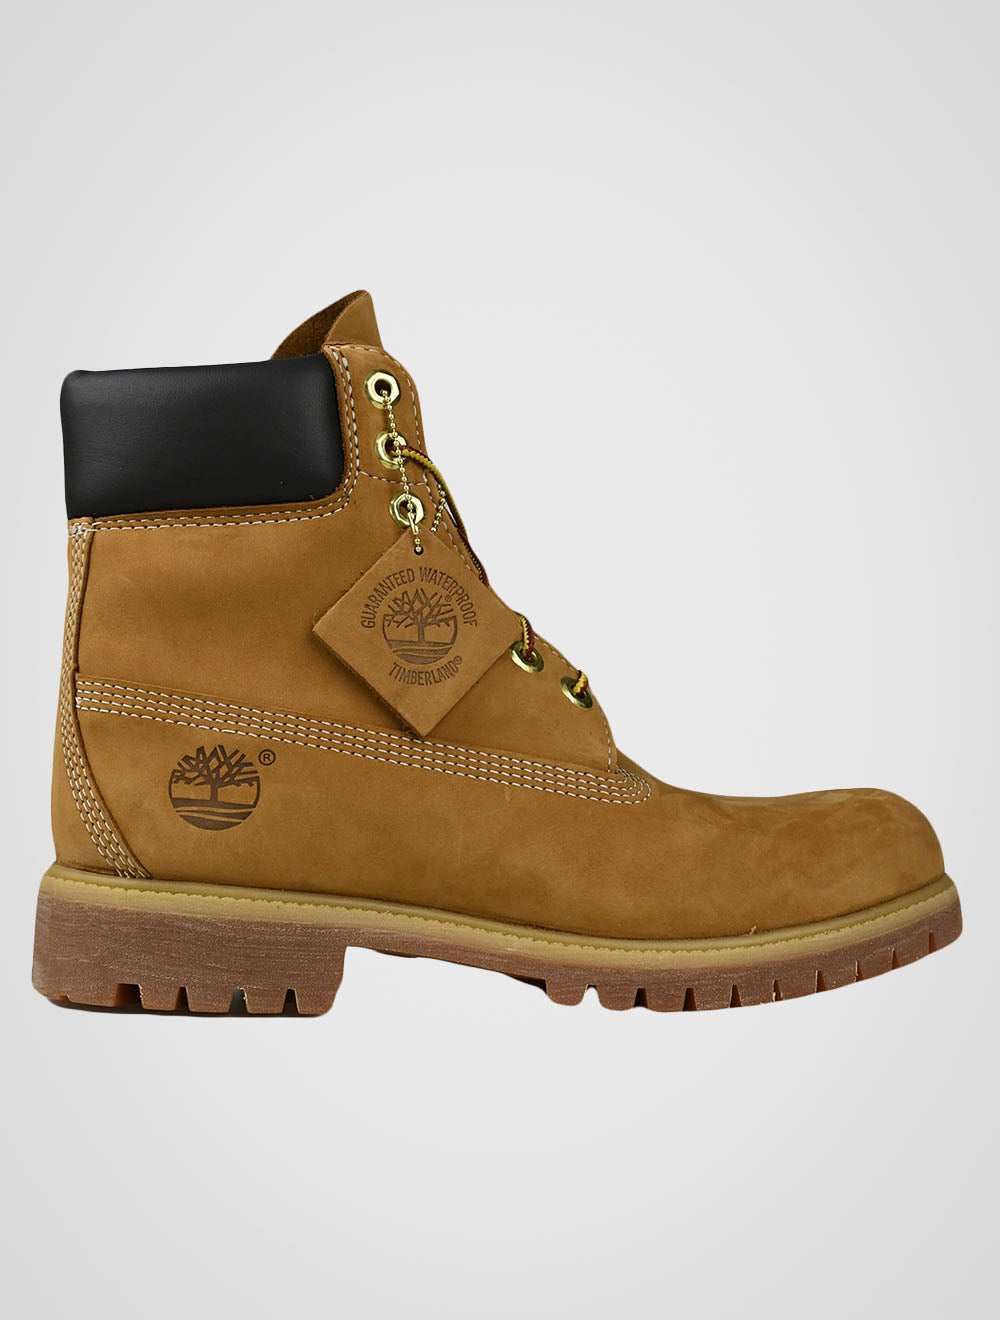 Timberland Leather Nubuck Light Brown Boots